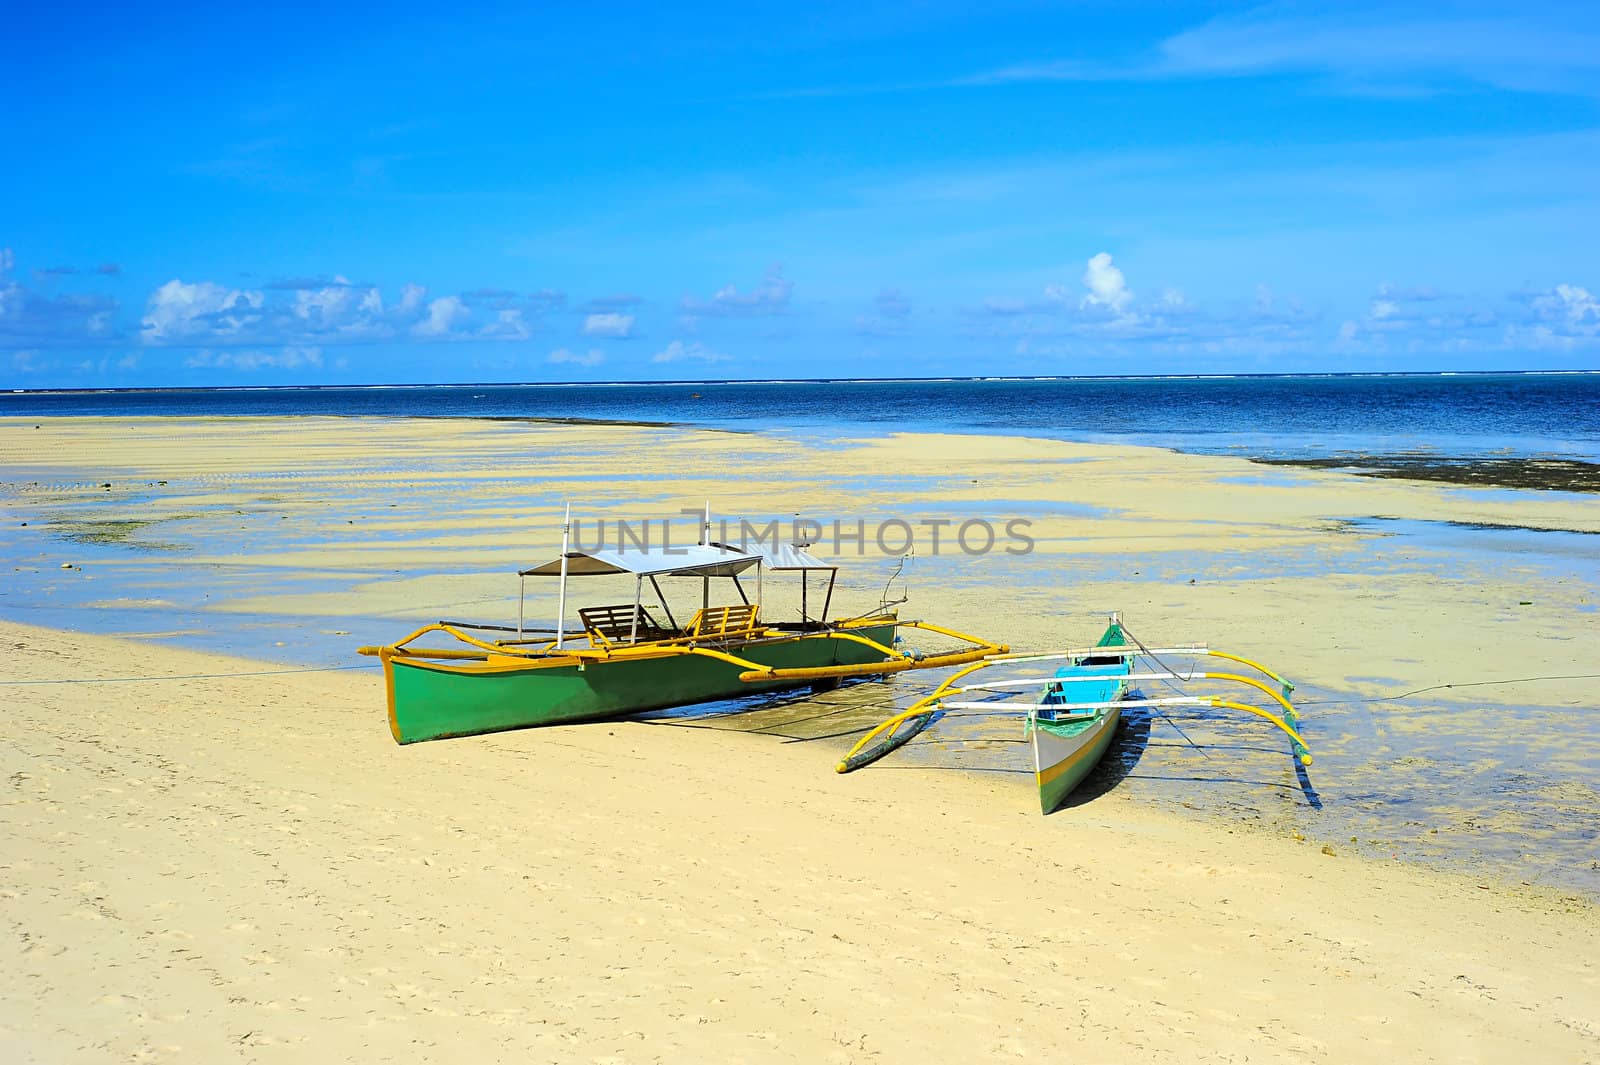 Traditional Philippines boats on the beach during the low tide on Shiargao island, Philippines